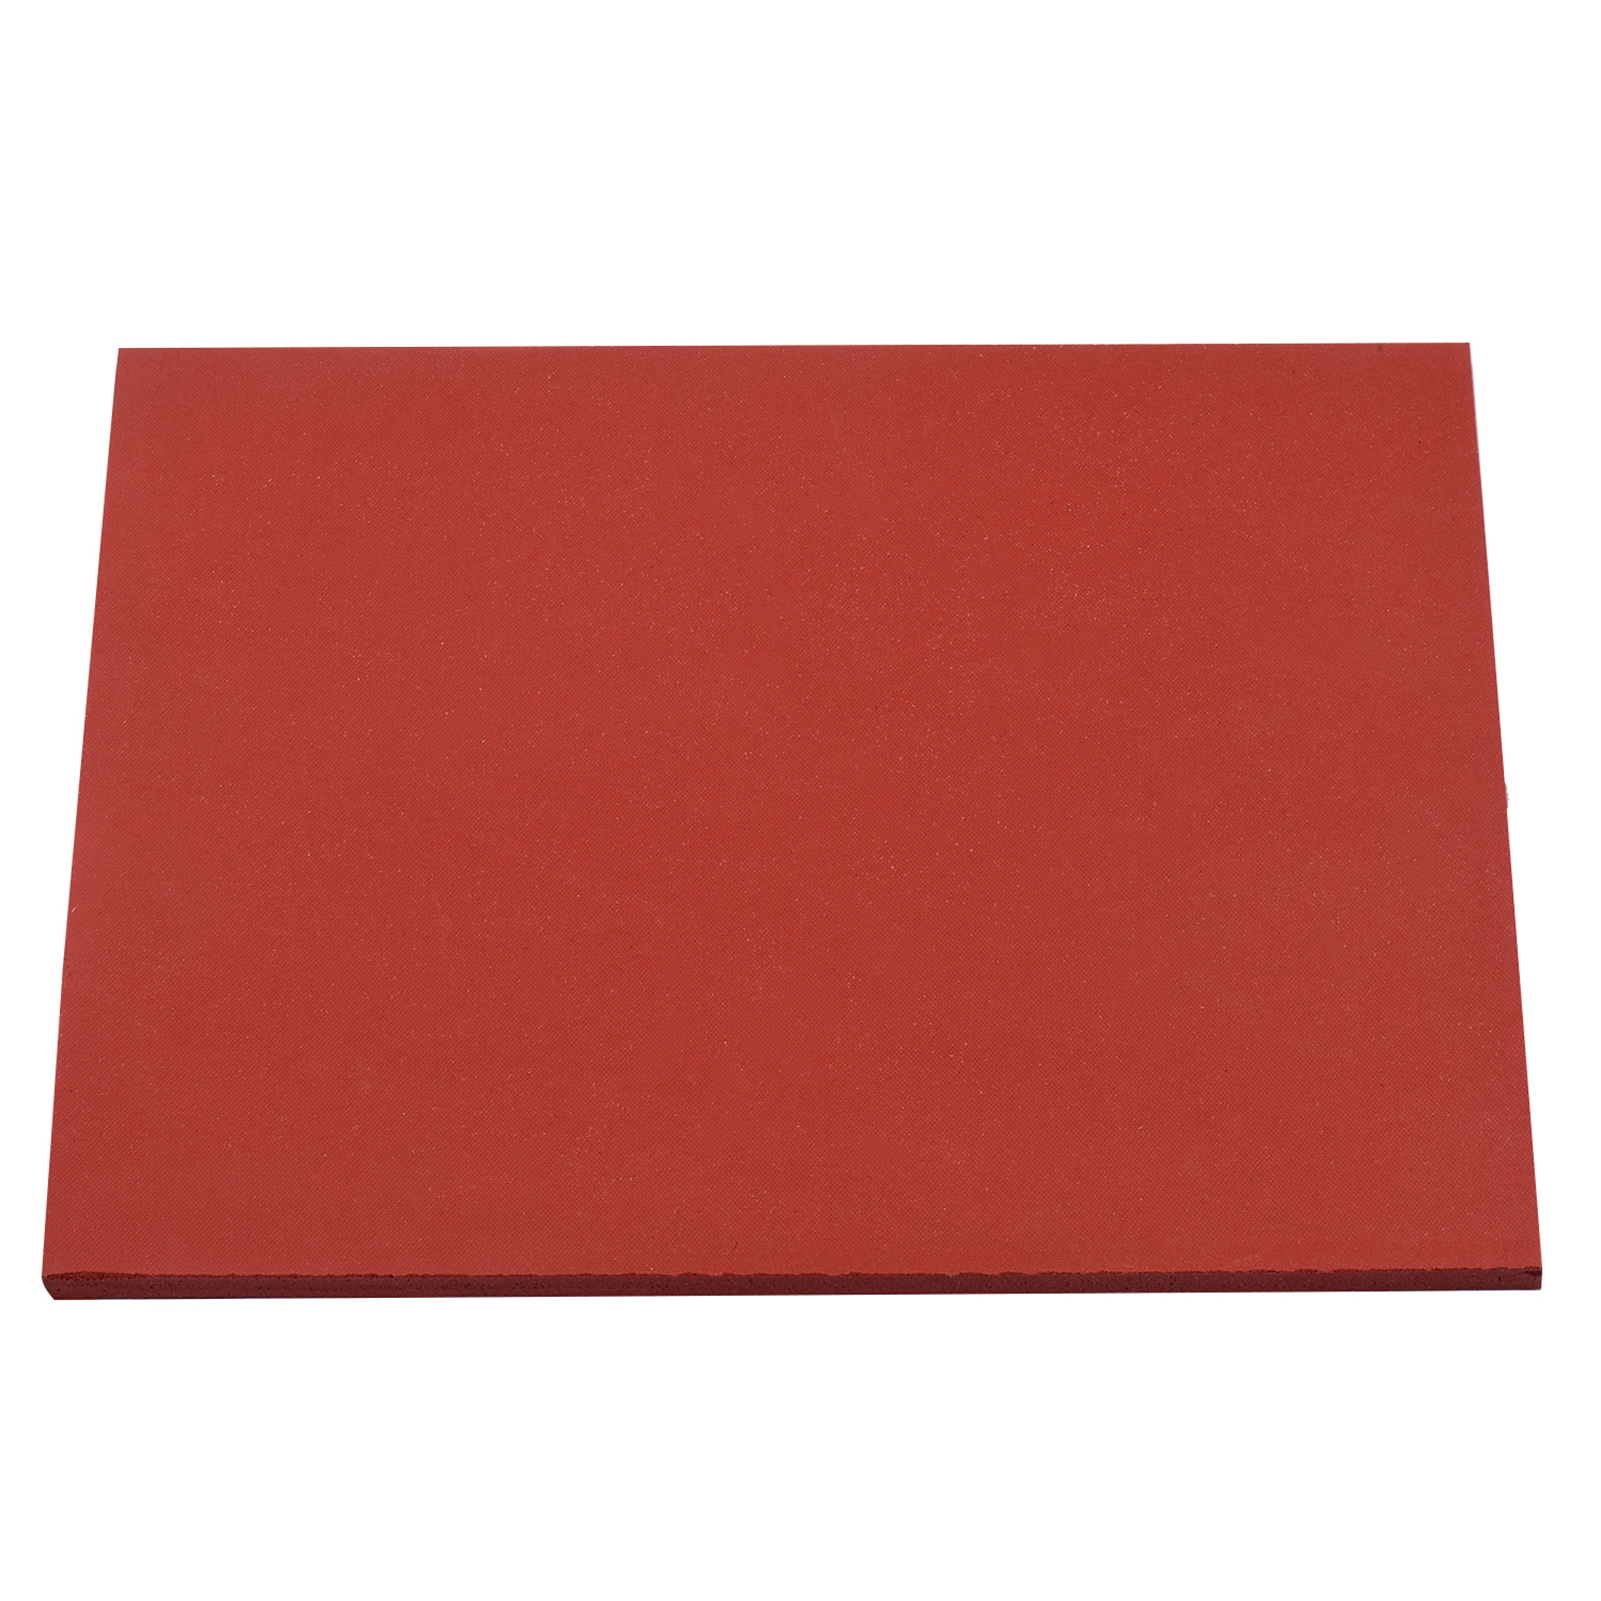 250*300*8mm Heat Pressing Mat Silicone Pad High Resistant Plate